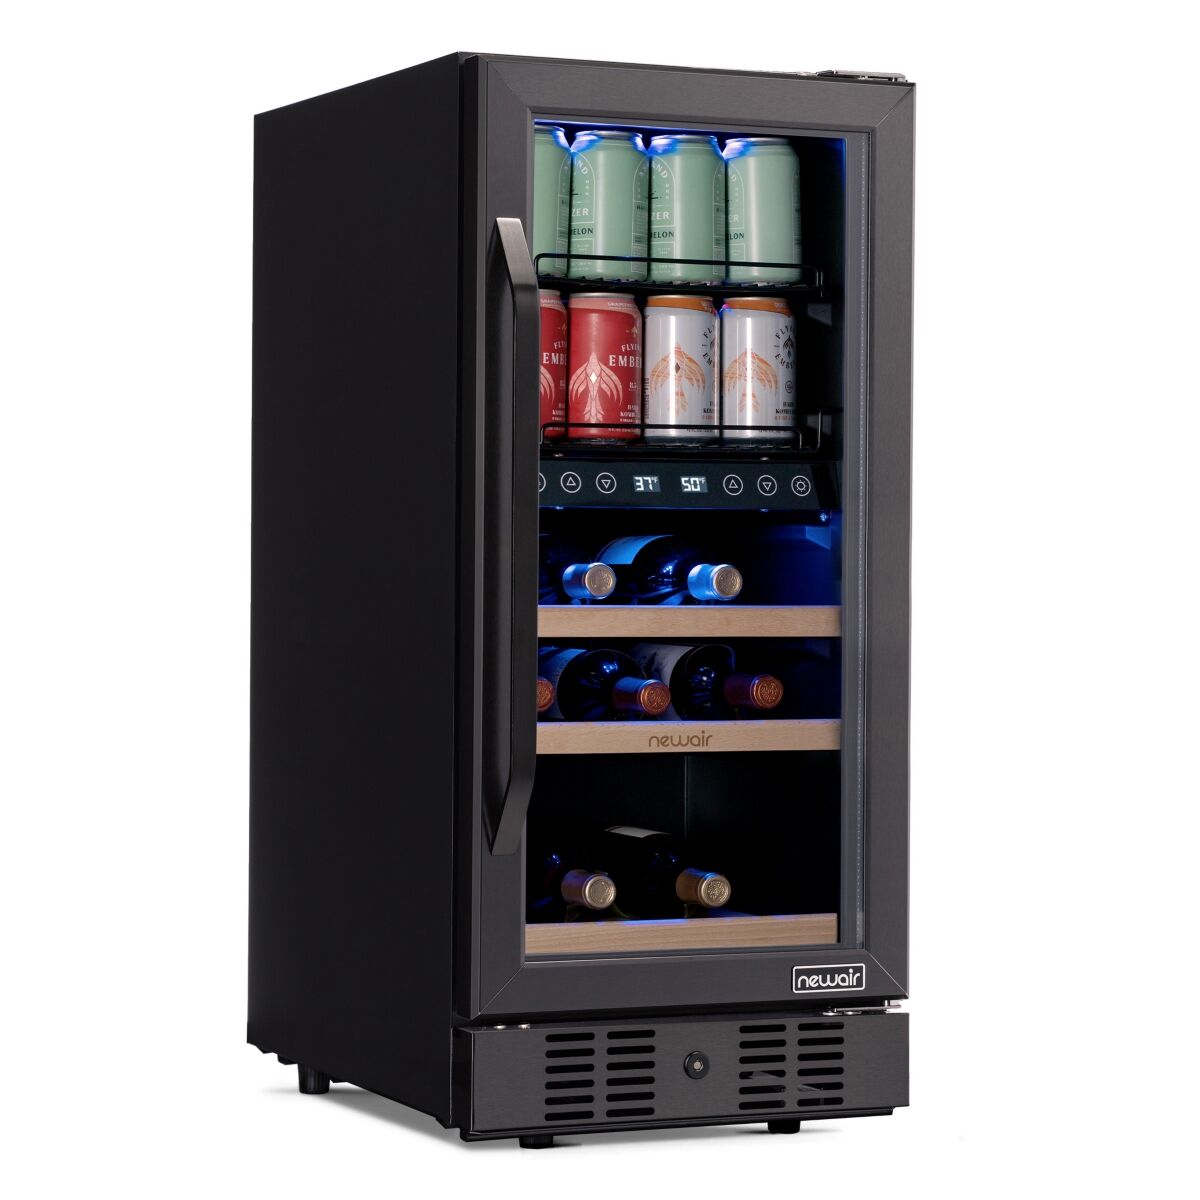 Newair 15 Inch Wine and Beverage Refrigerator - 13 Bottles & 48 Cans Capacity with Dual Temperature Zone Wine Cooler, Black Stainless Steel & Double-L